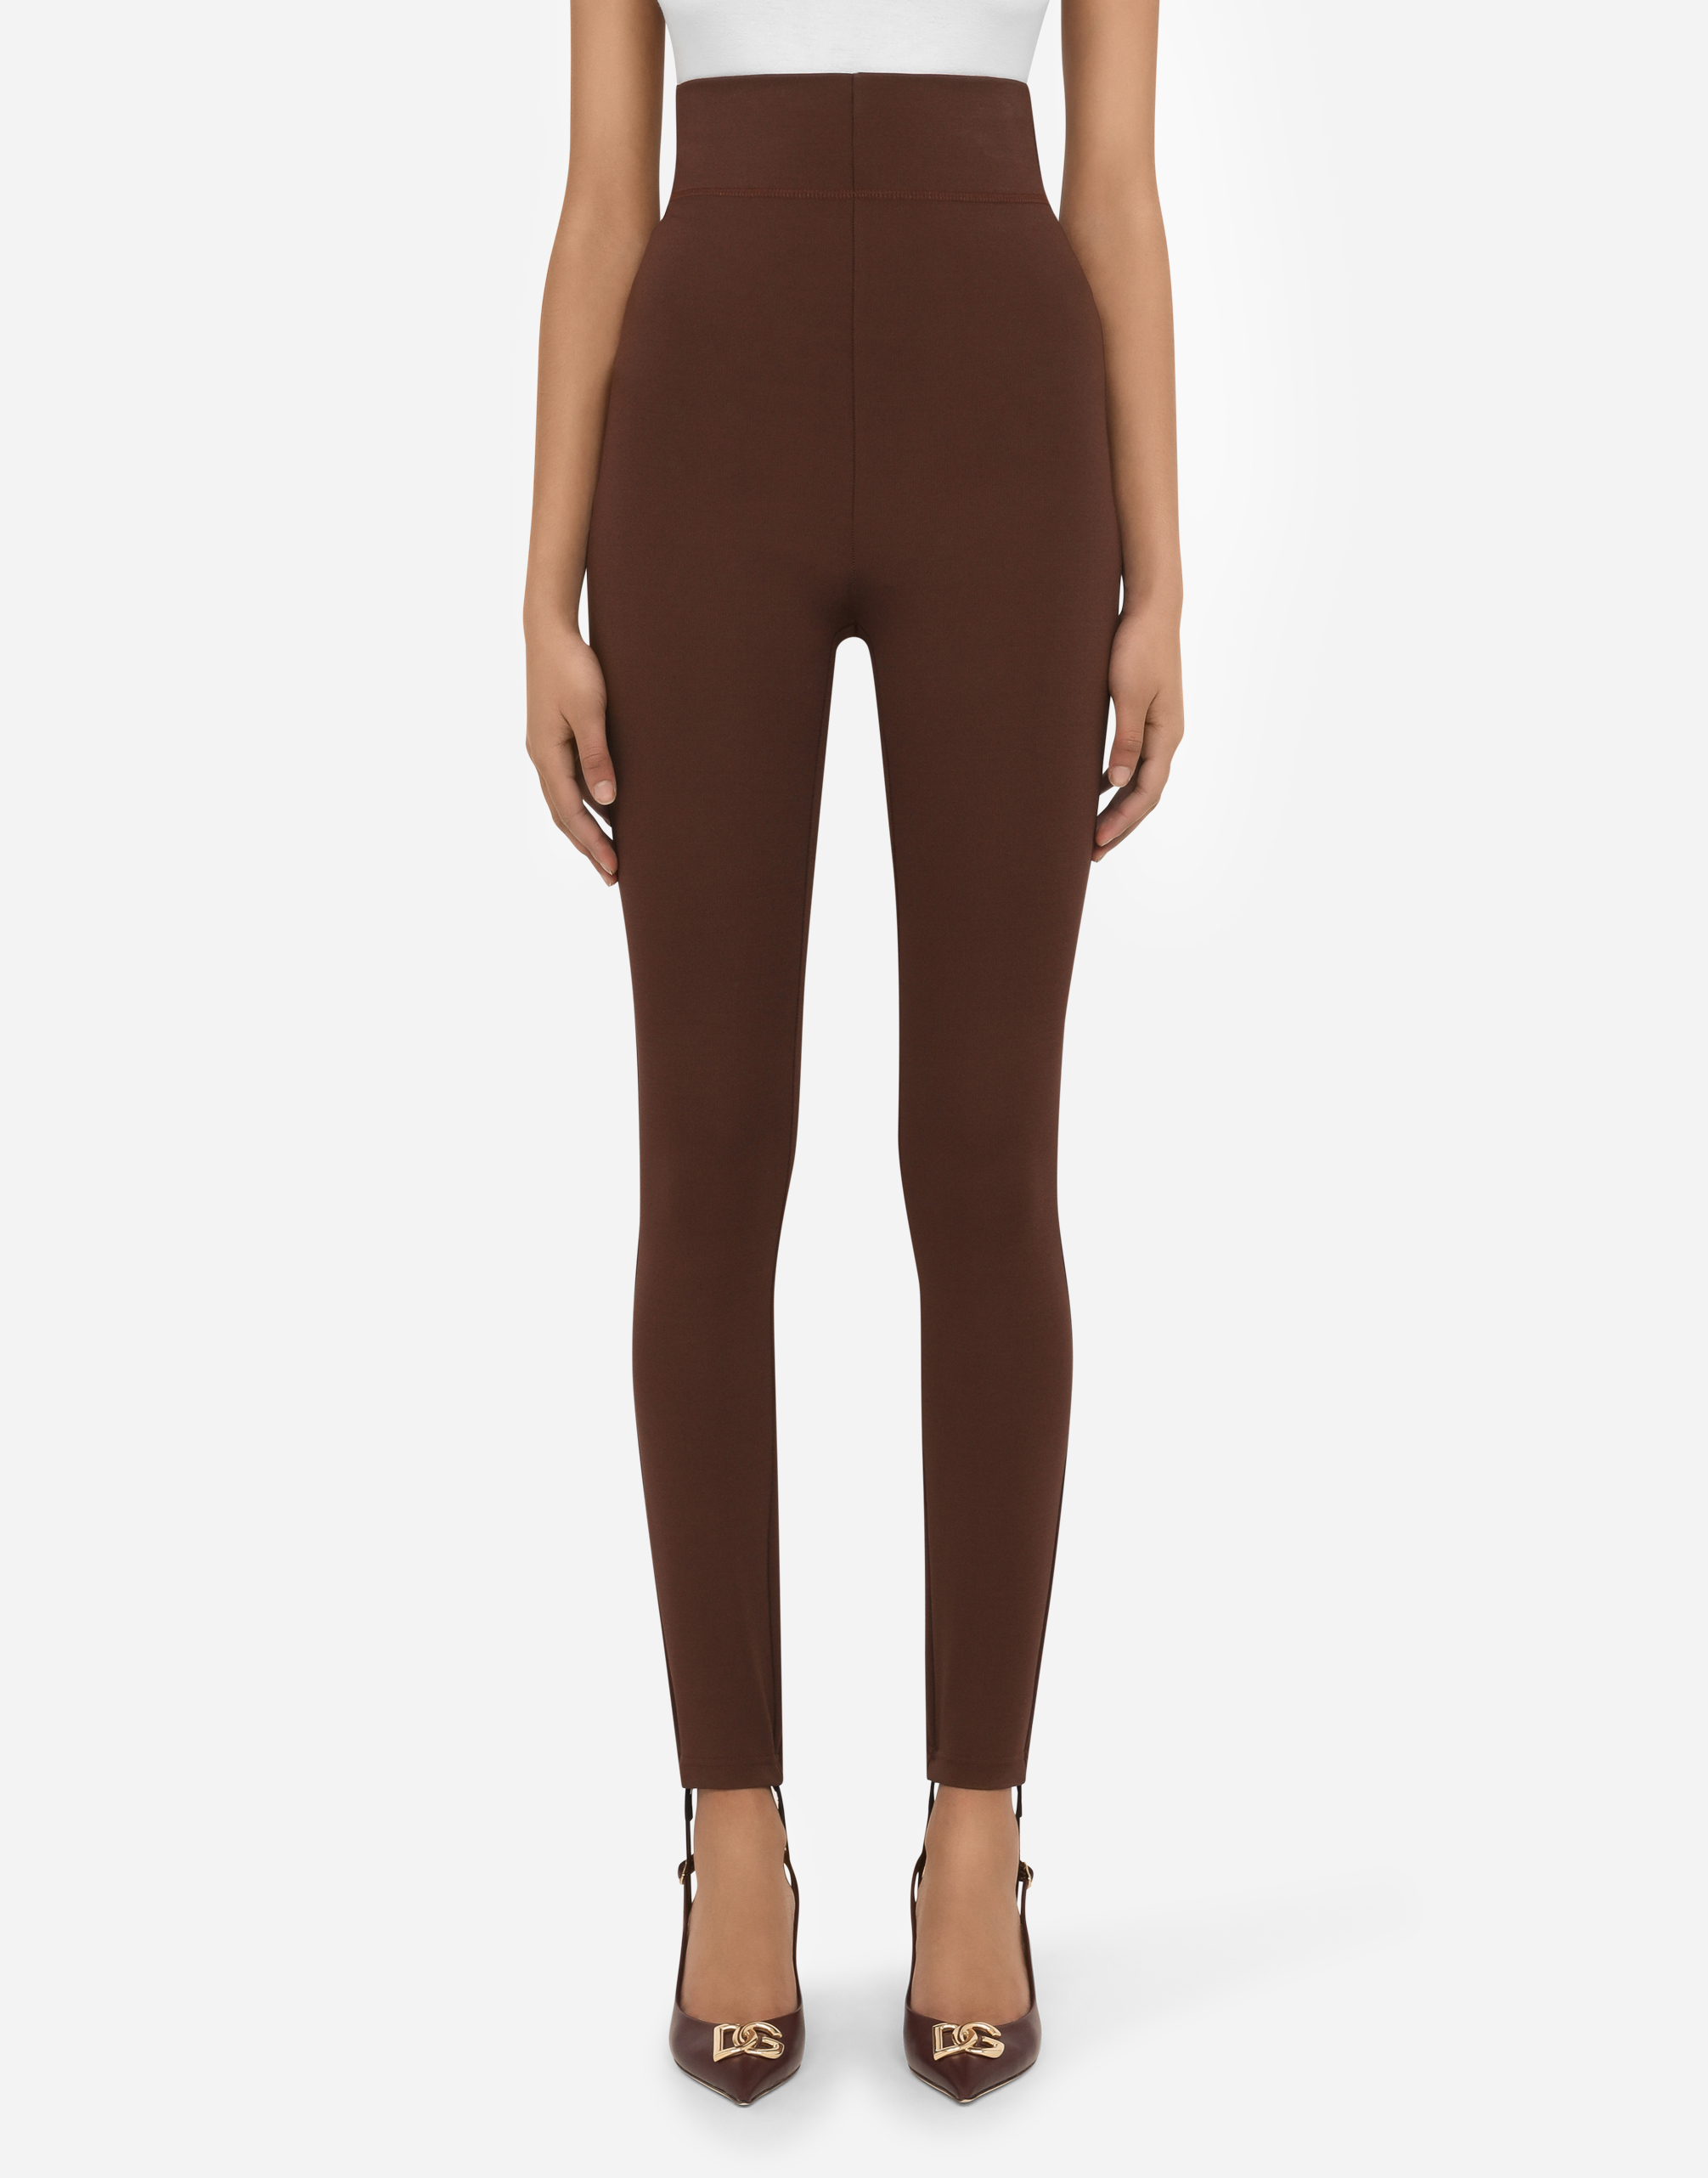 Jersey leggings with stirrups in Brown